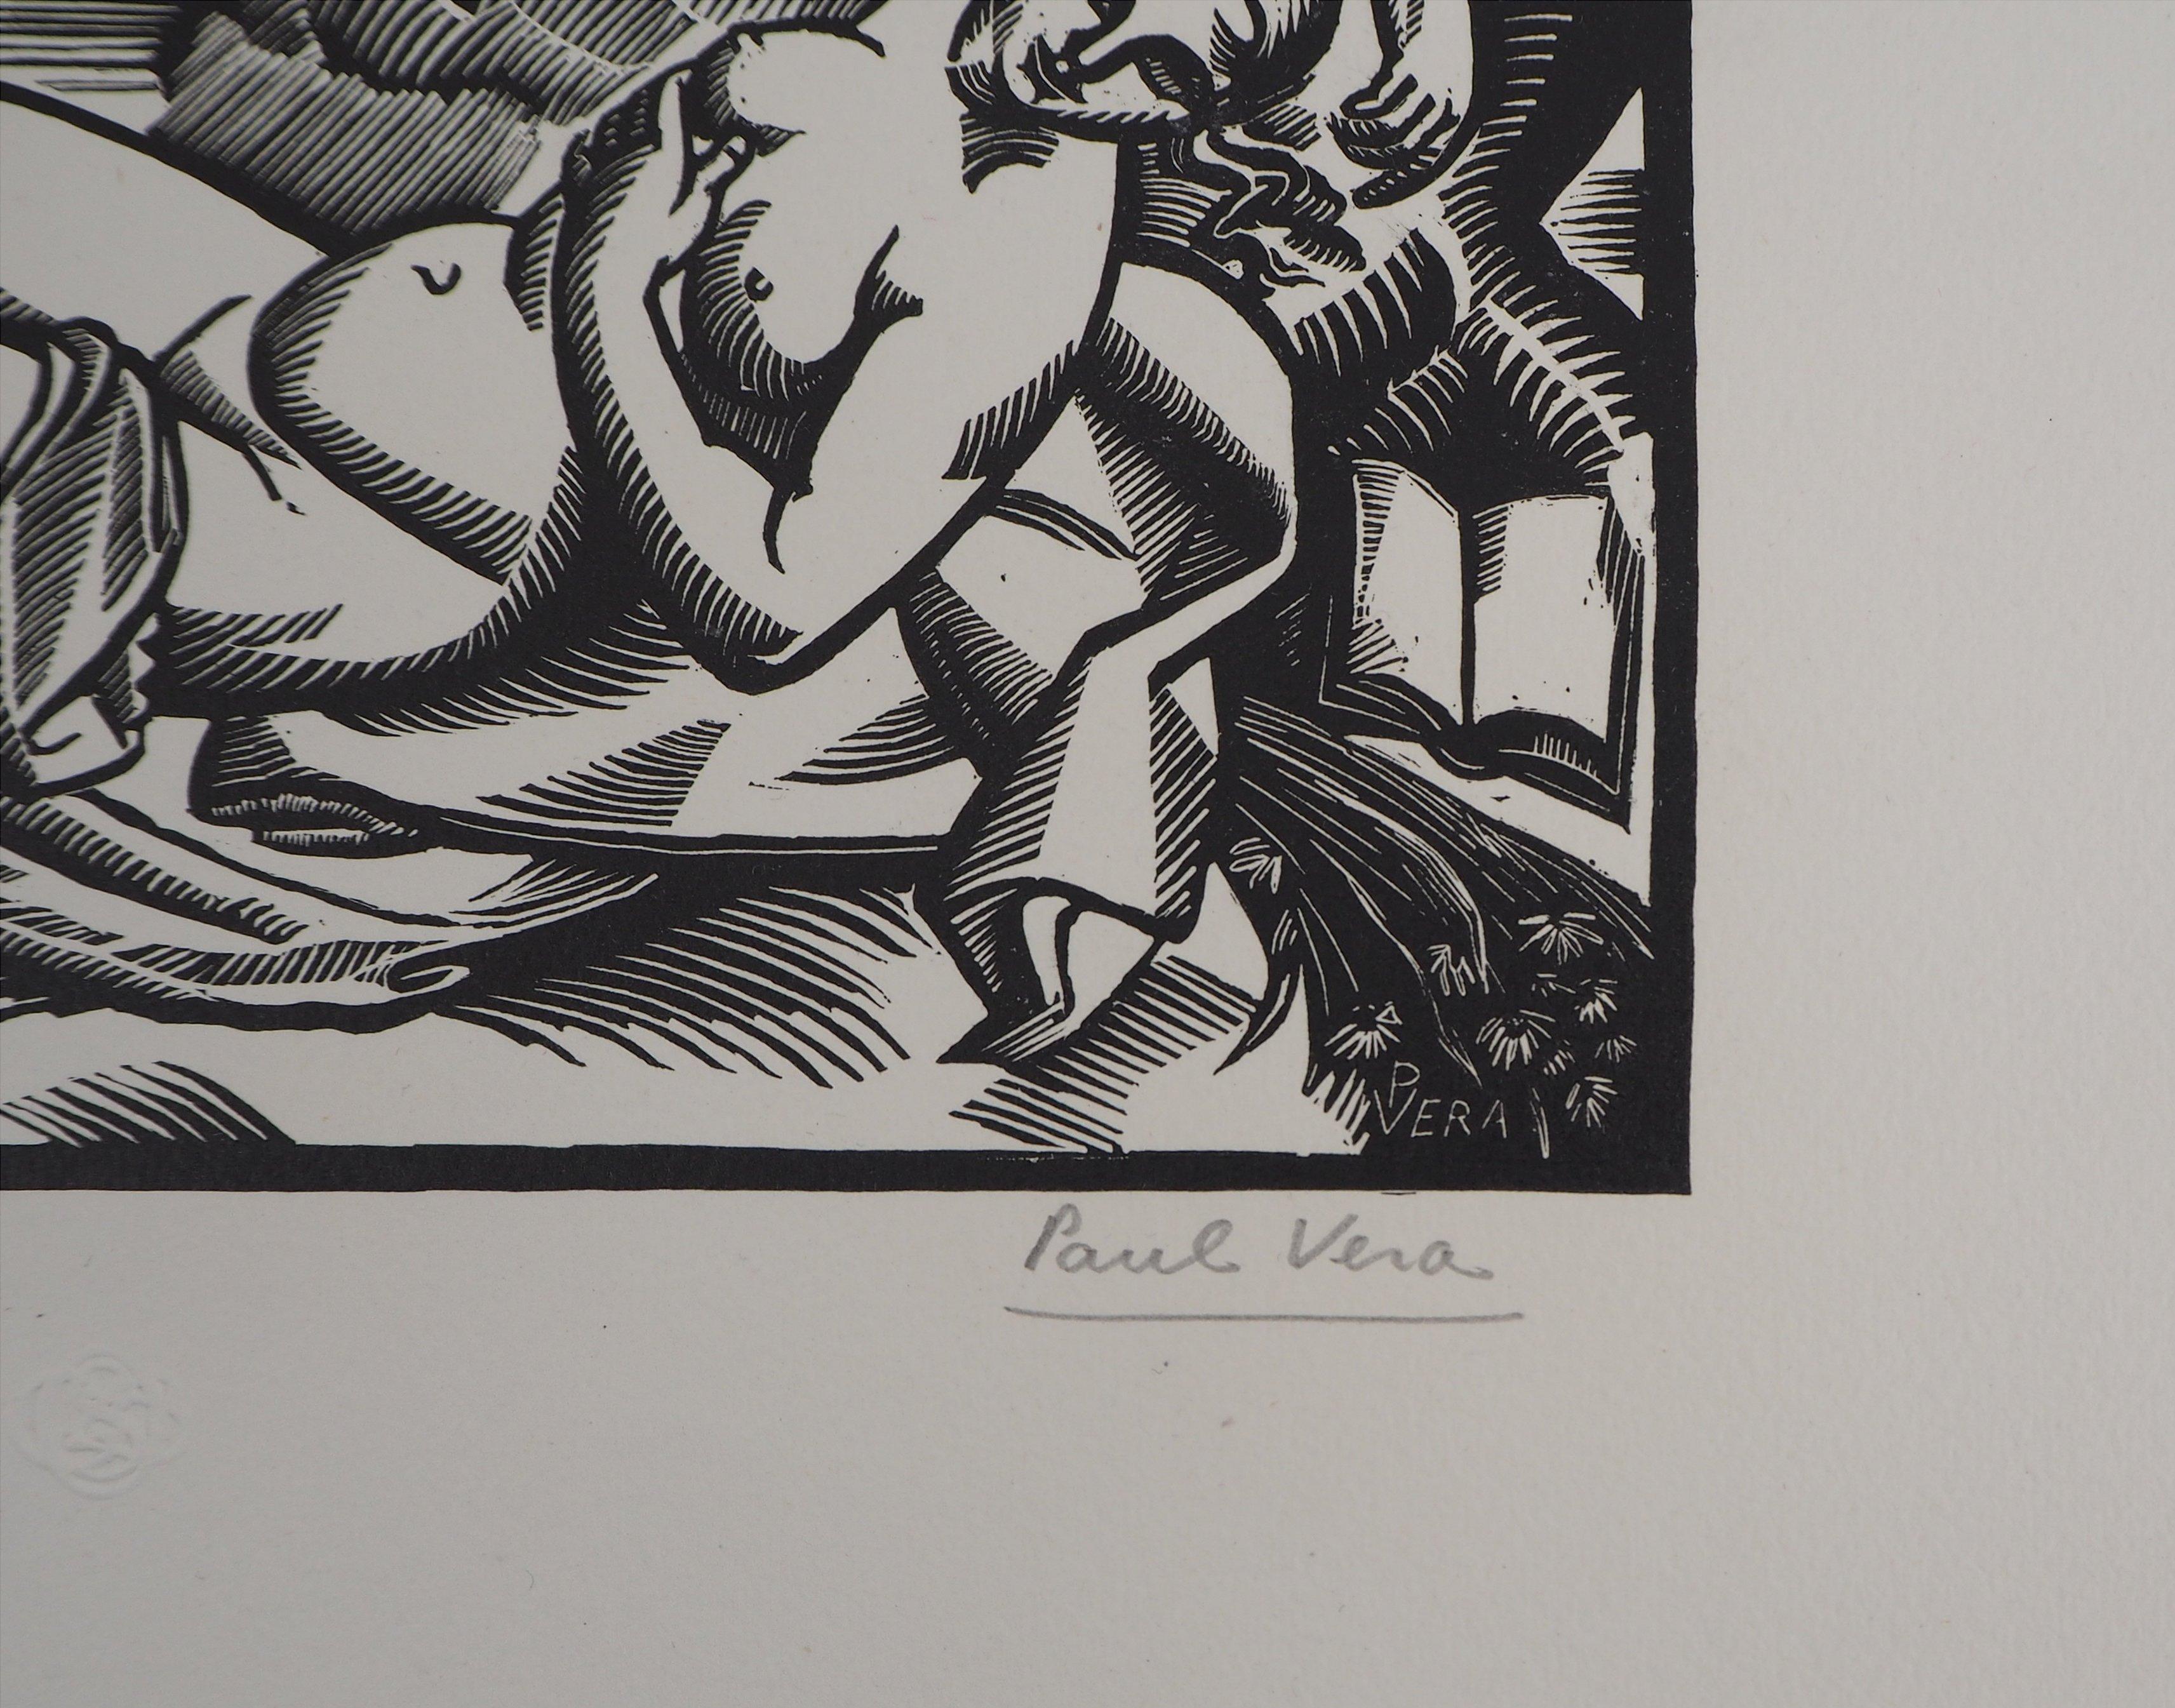 Paul Vera
Summer, 1924

Original woodcut
Handsigned in pencil
Numbered /160
On vellum 25 x 33 cm (c. 9,8 x 12,9 in)

Edited for the 'Imagier de la Gravure sur Bois' (5th year) and bears the blind stamp of the editor (Lugt 1140a)

Excellent